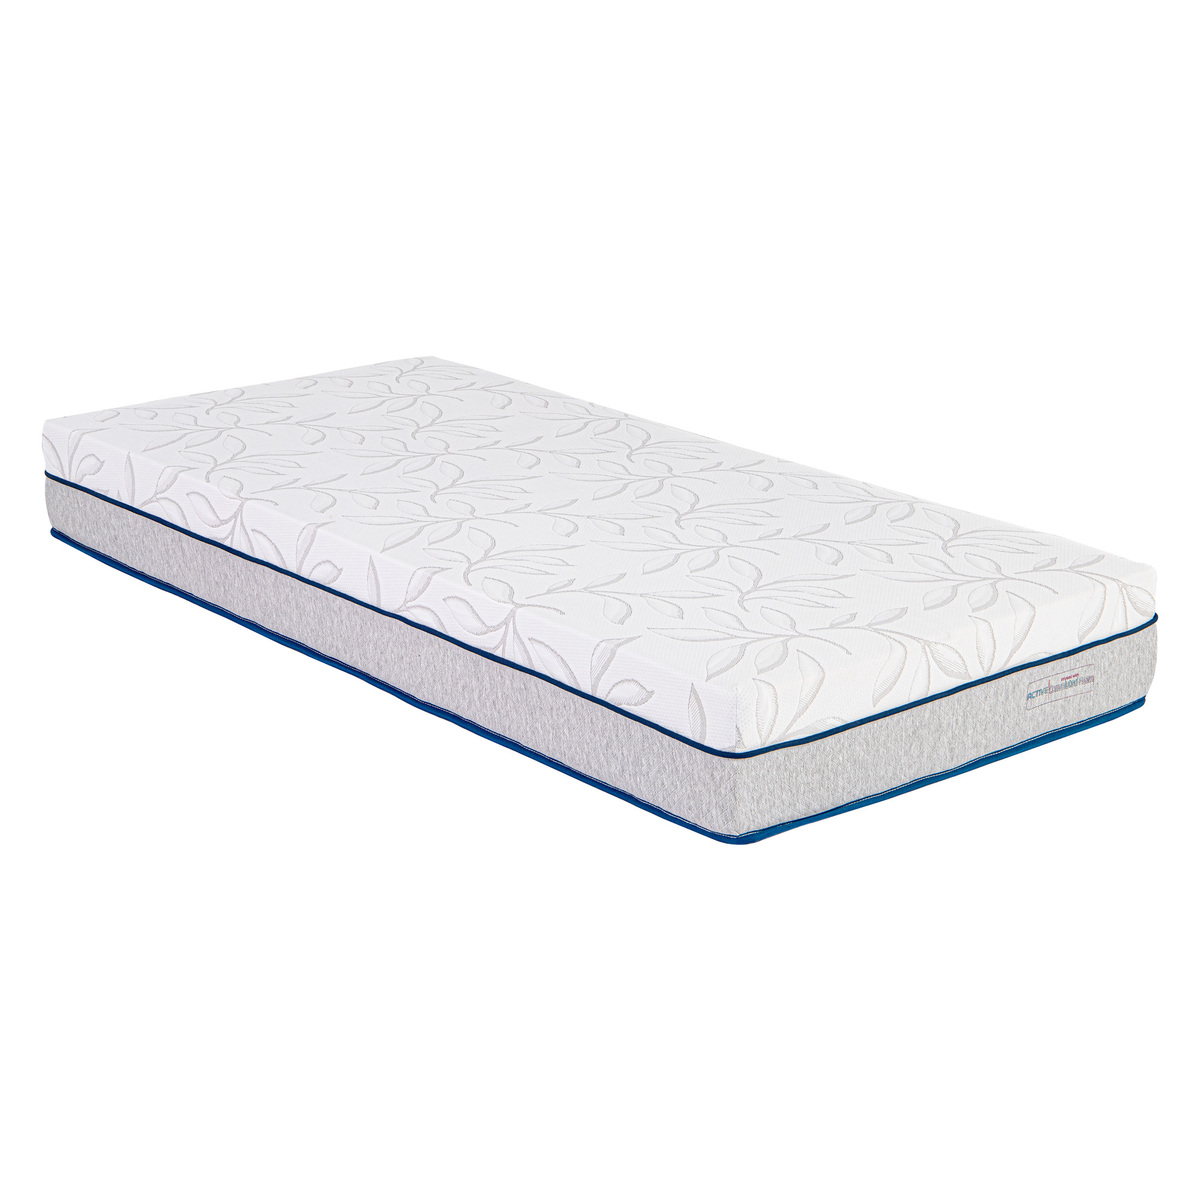 Royal Cozee Medical Gel Infused Mattress 200x160+20cm